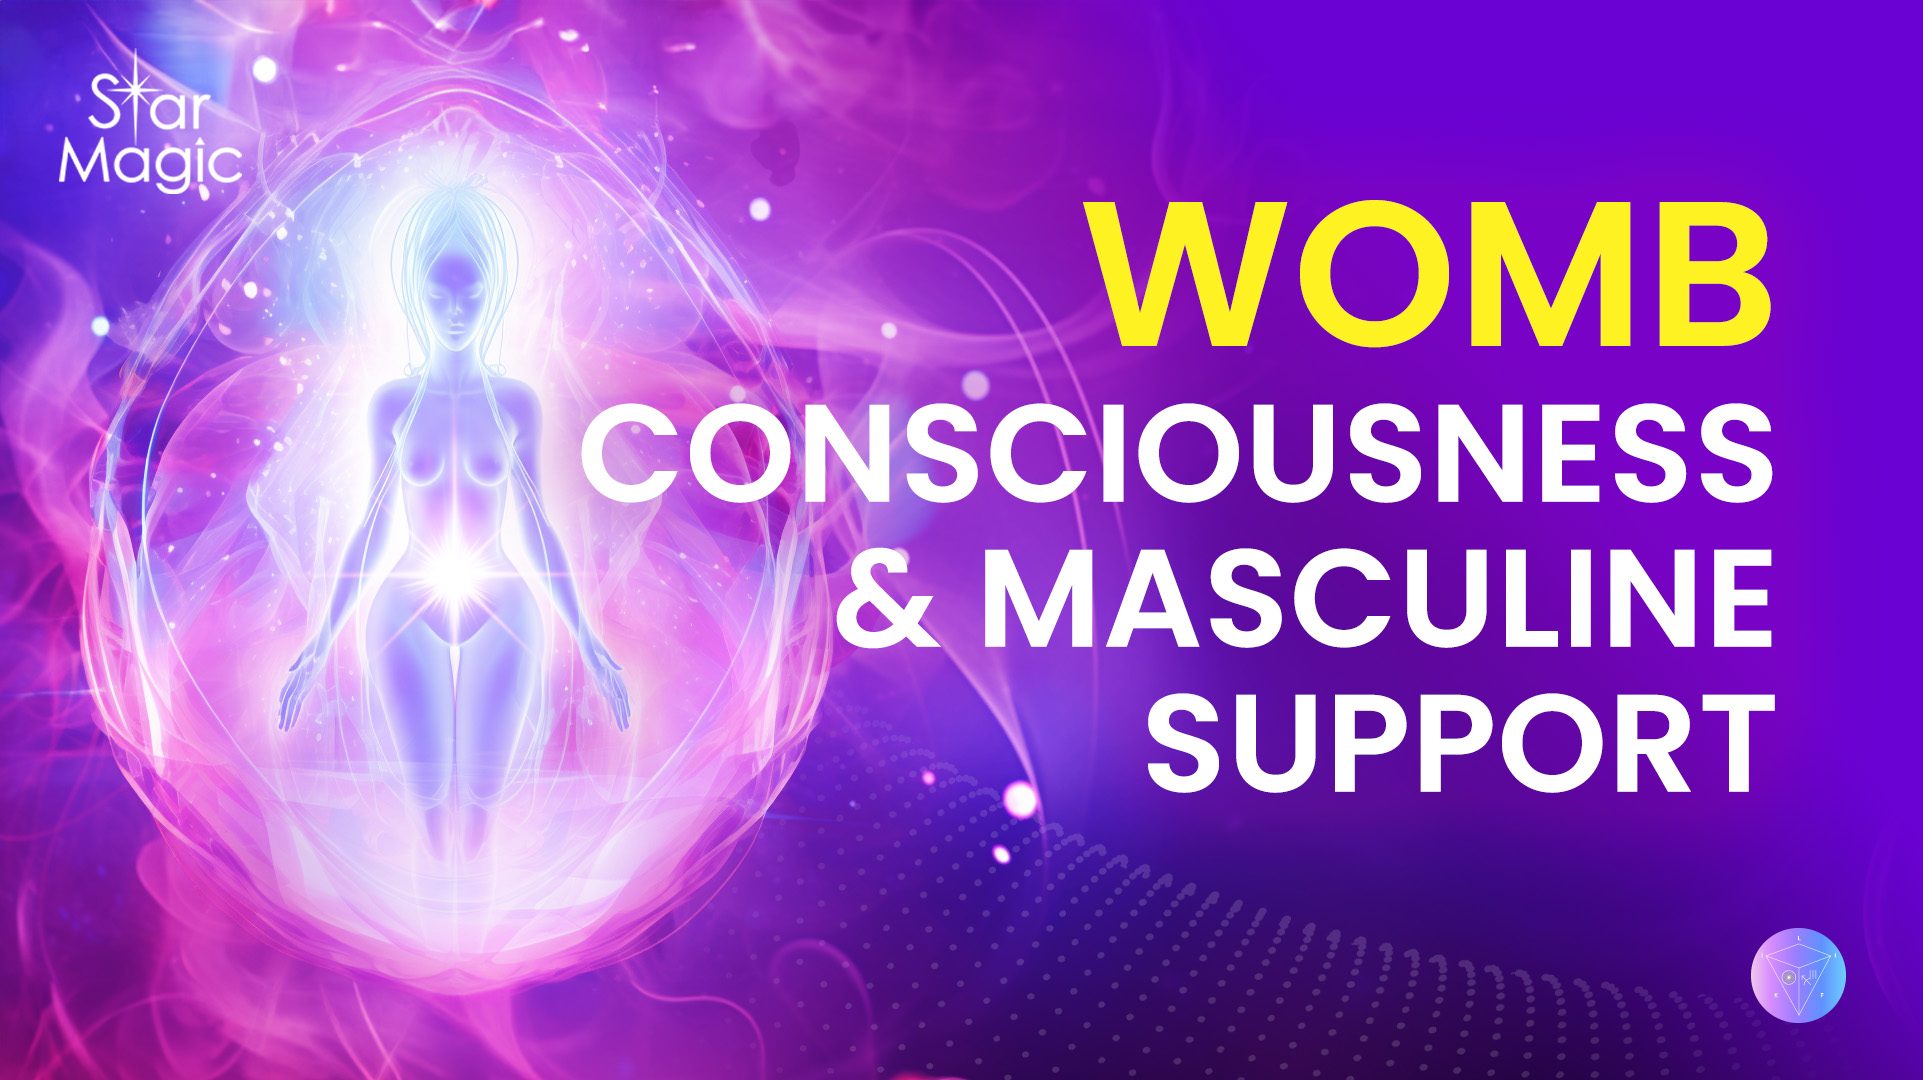 Womb Consciousness & Masculine Support